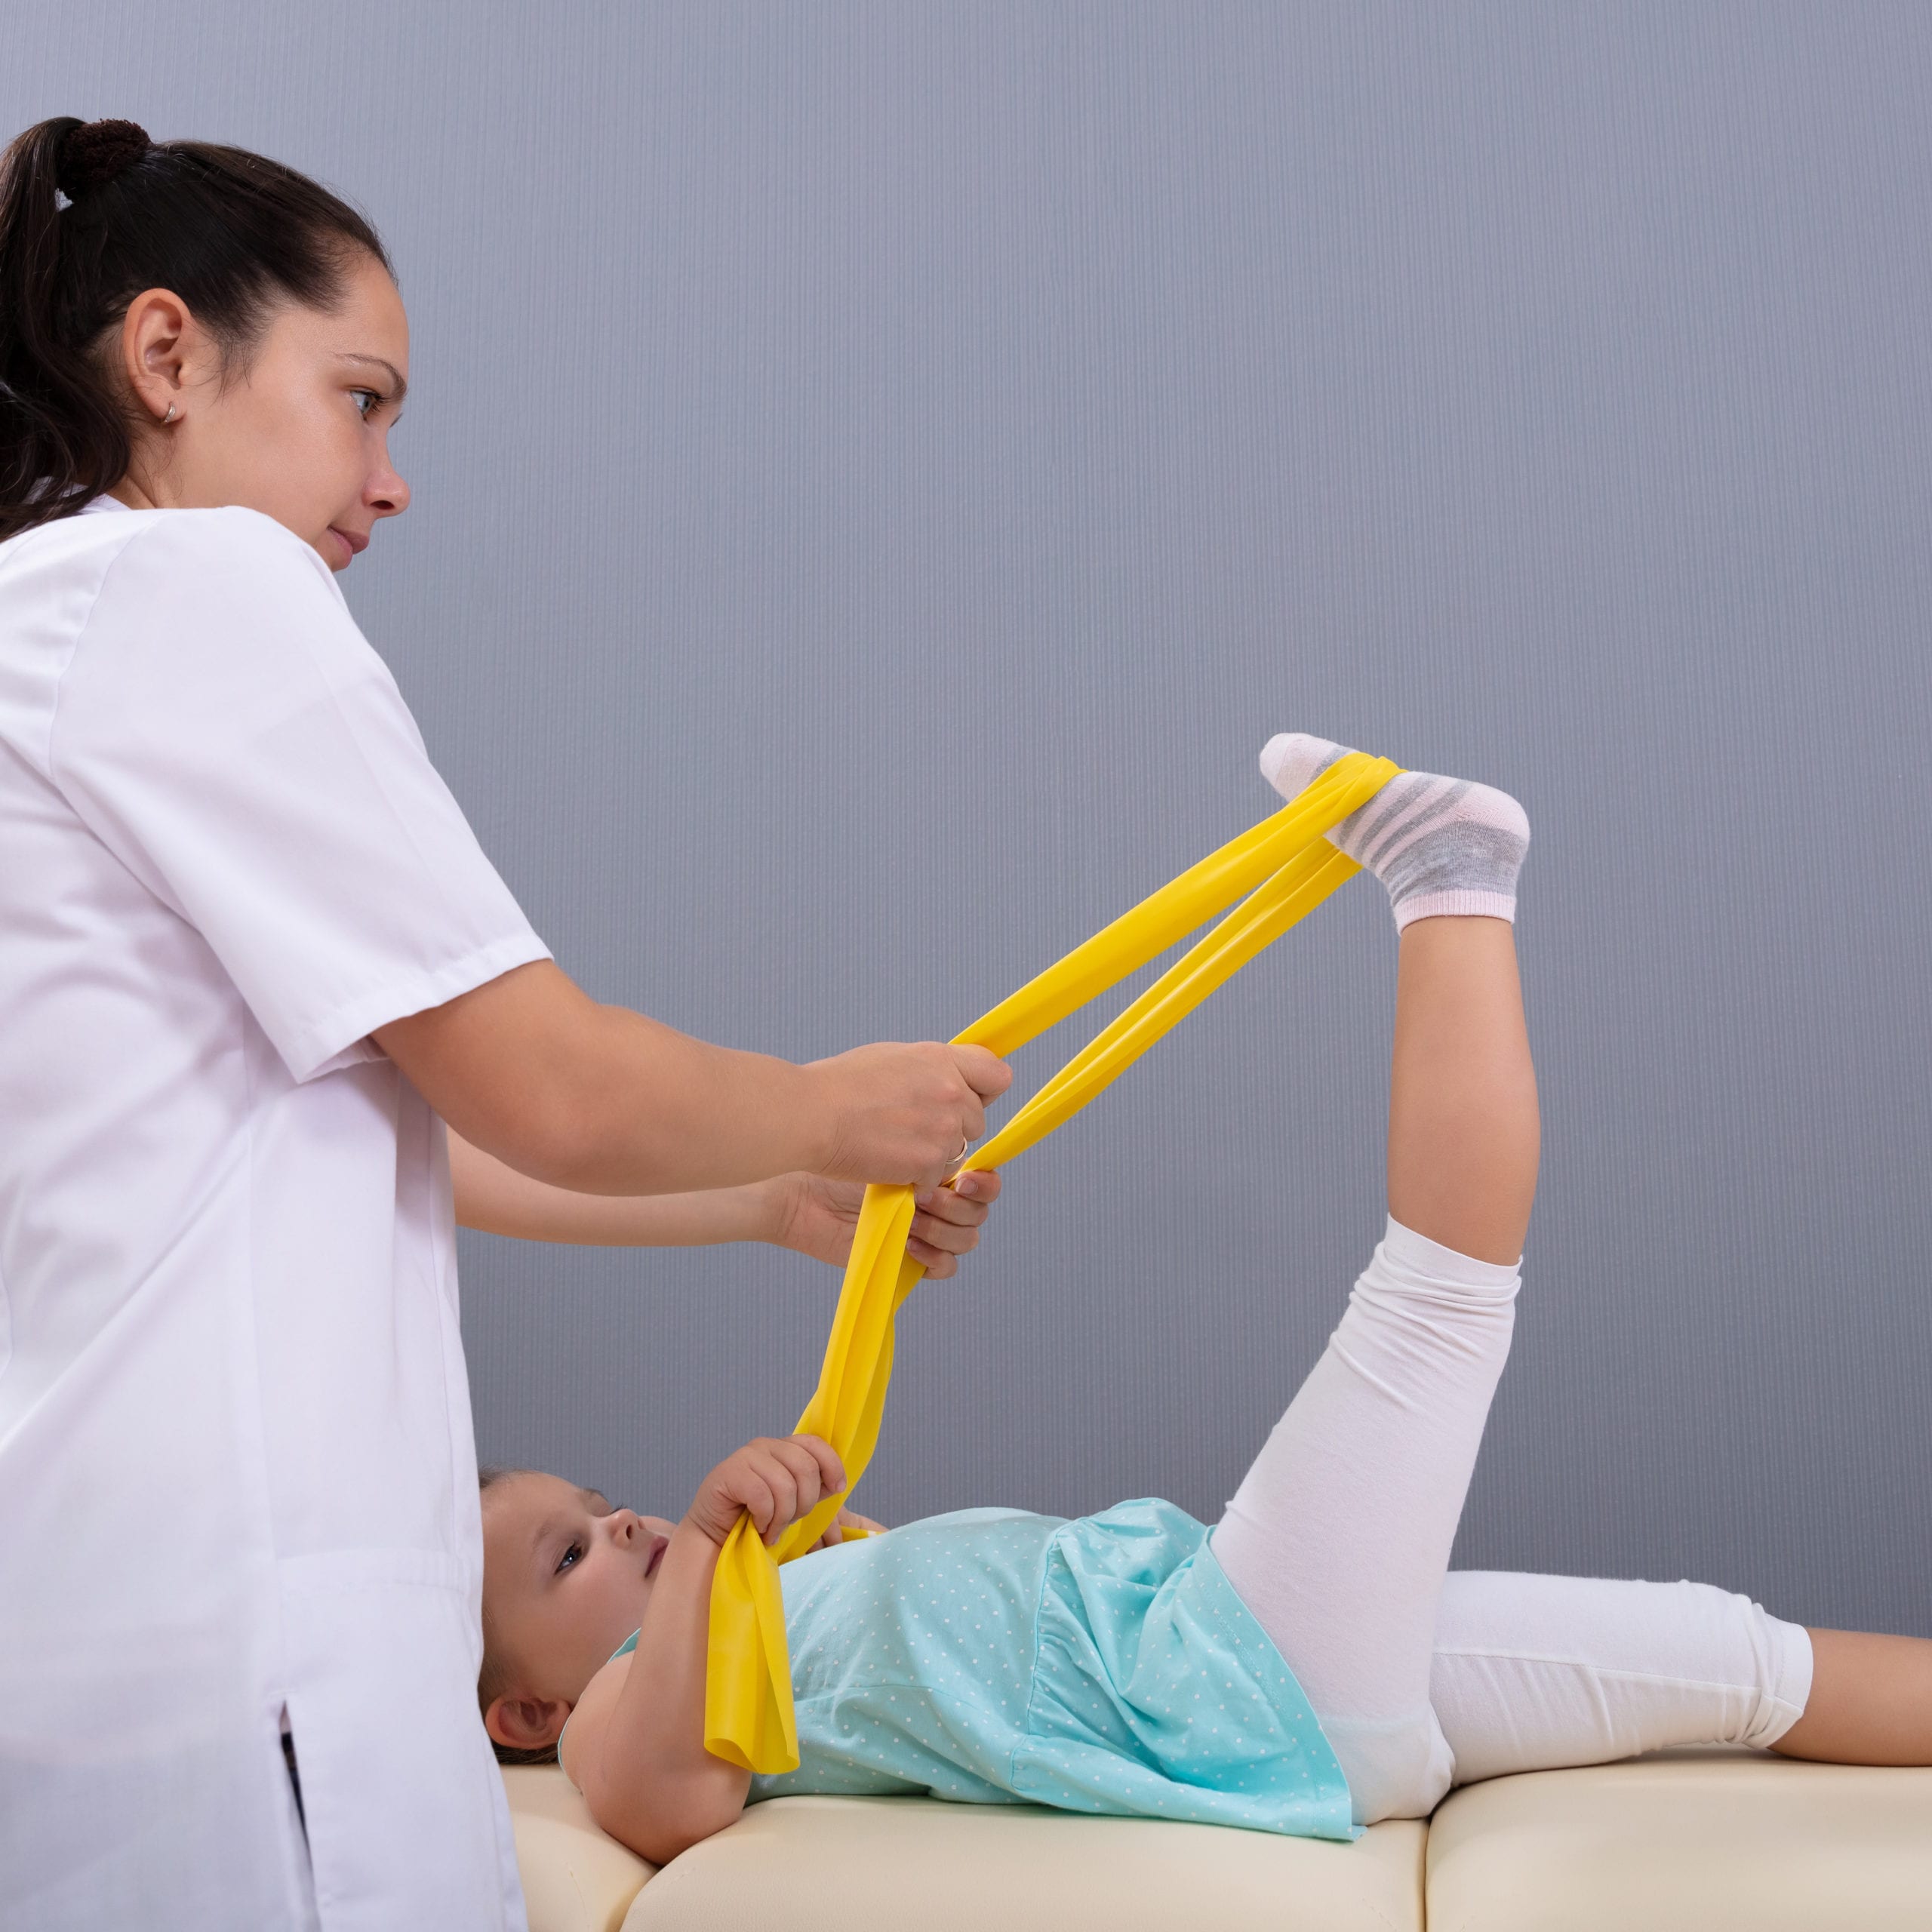 What Is Pediatric Physical Therapy? - AZ Medical Group